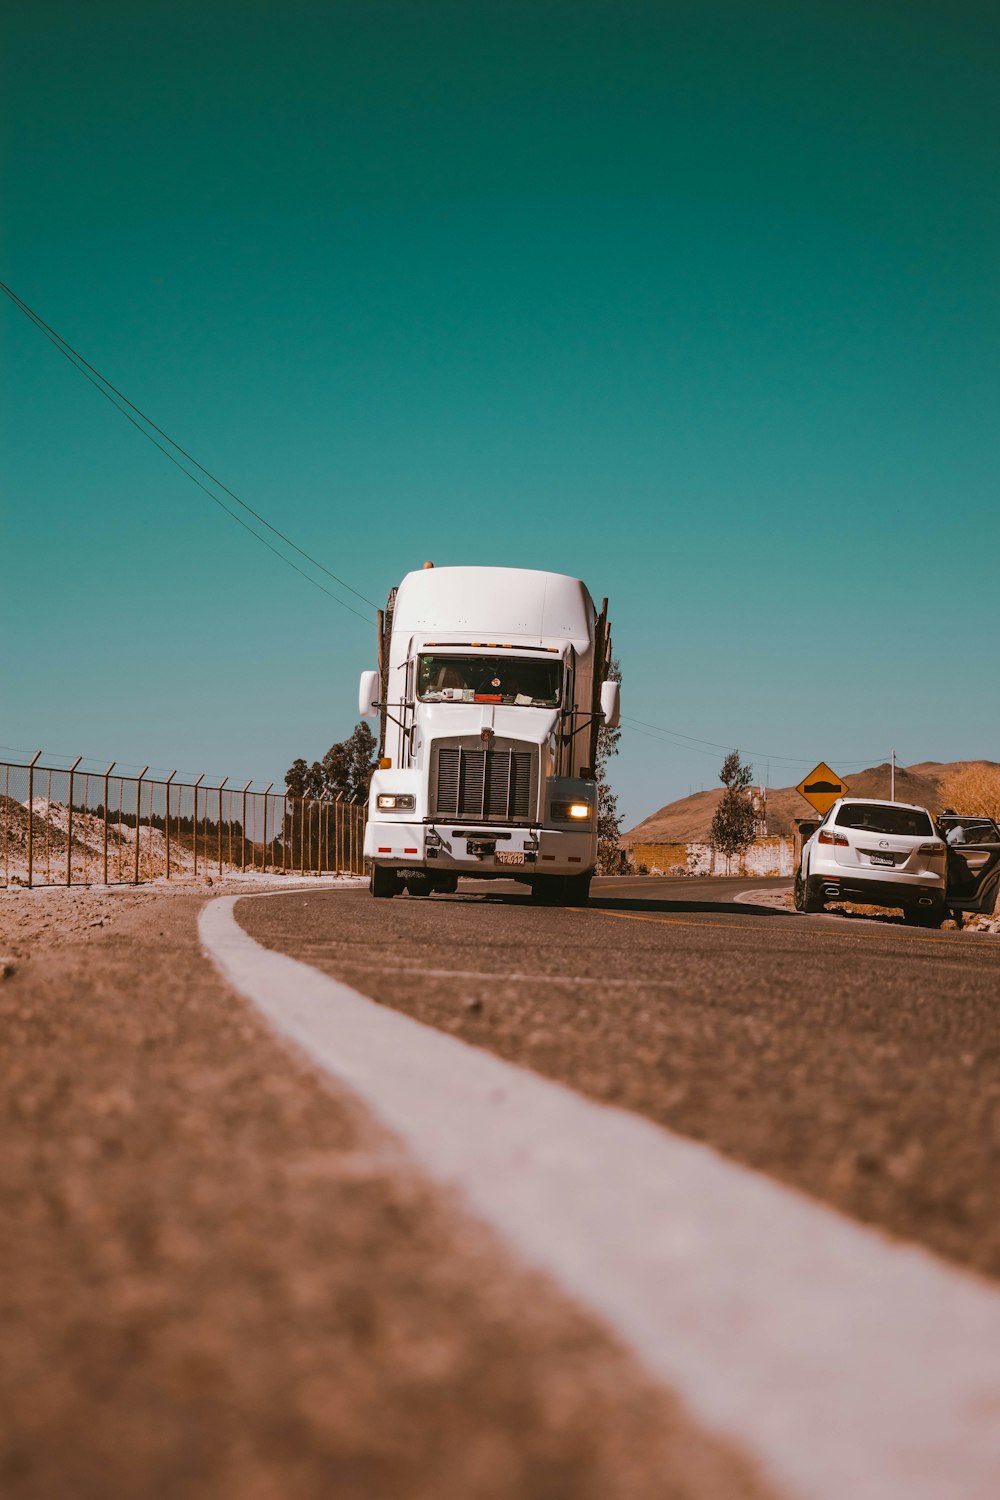 500 Lorry Pictures Hq Download Free Images On Unsplash